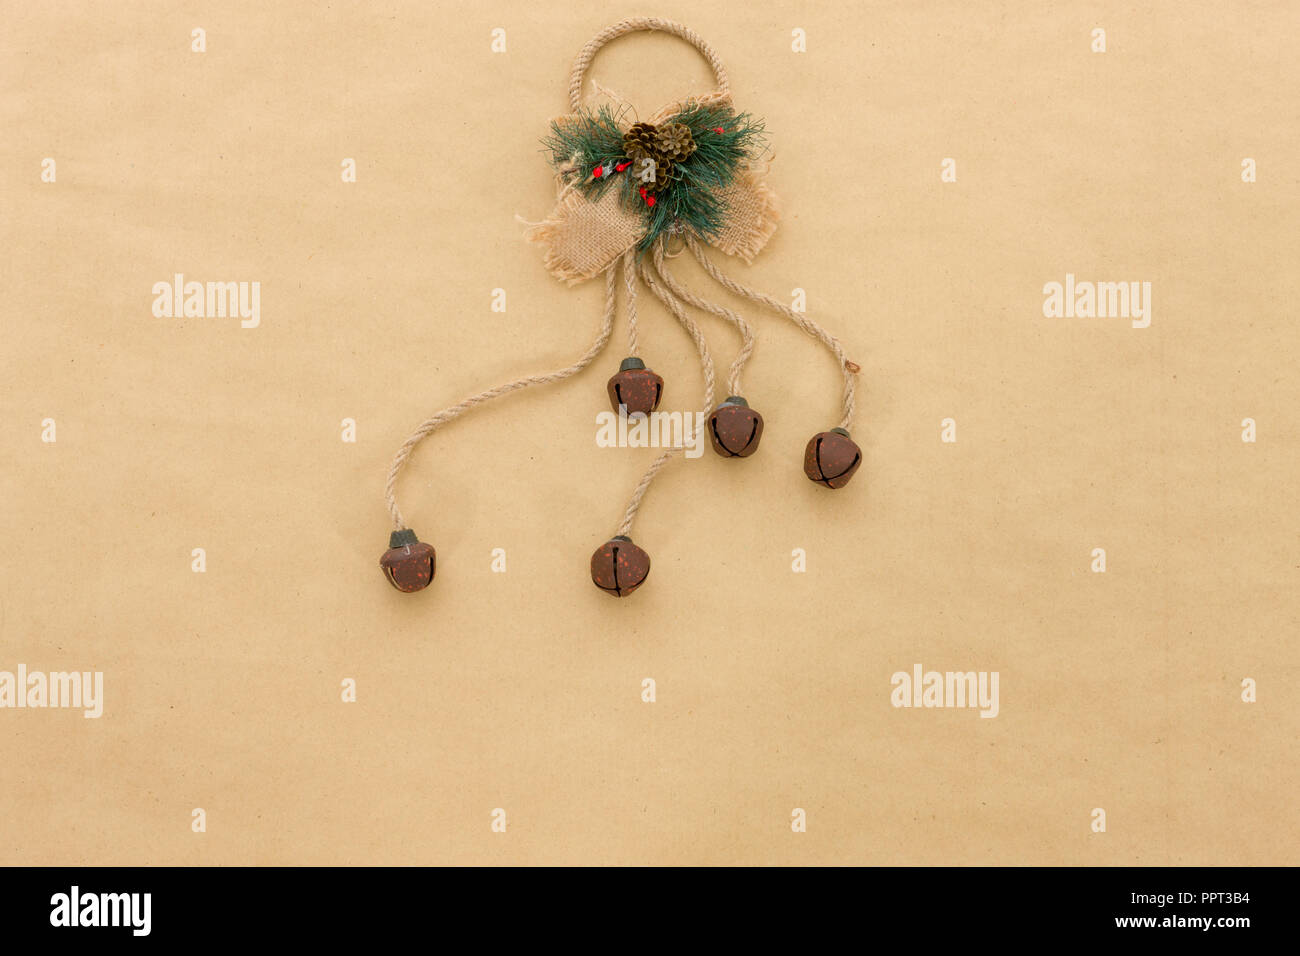 Cute retro Christmas decoration ornaments on a neutral natural paper background with space for copy Stock Photo